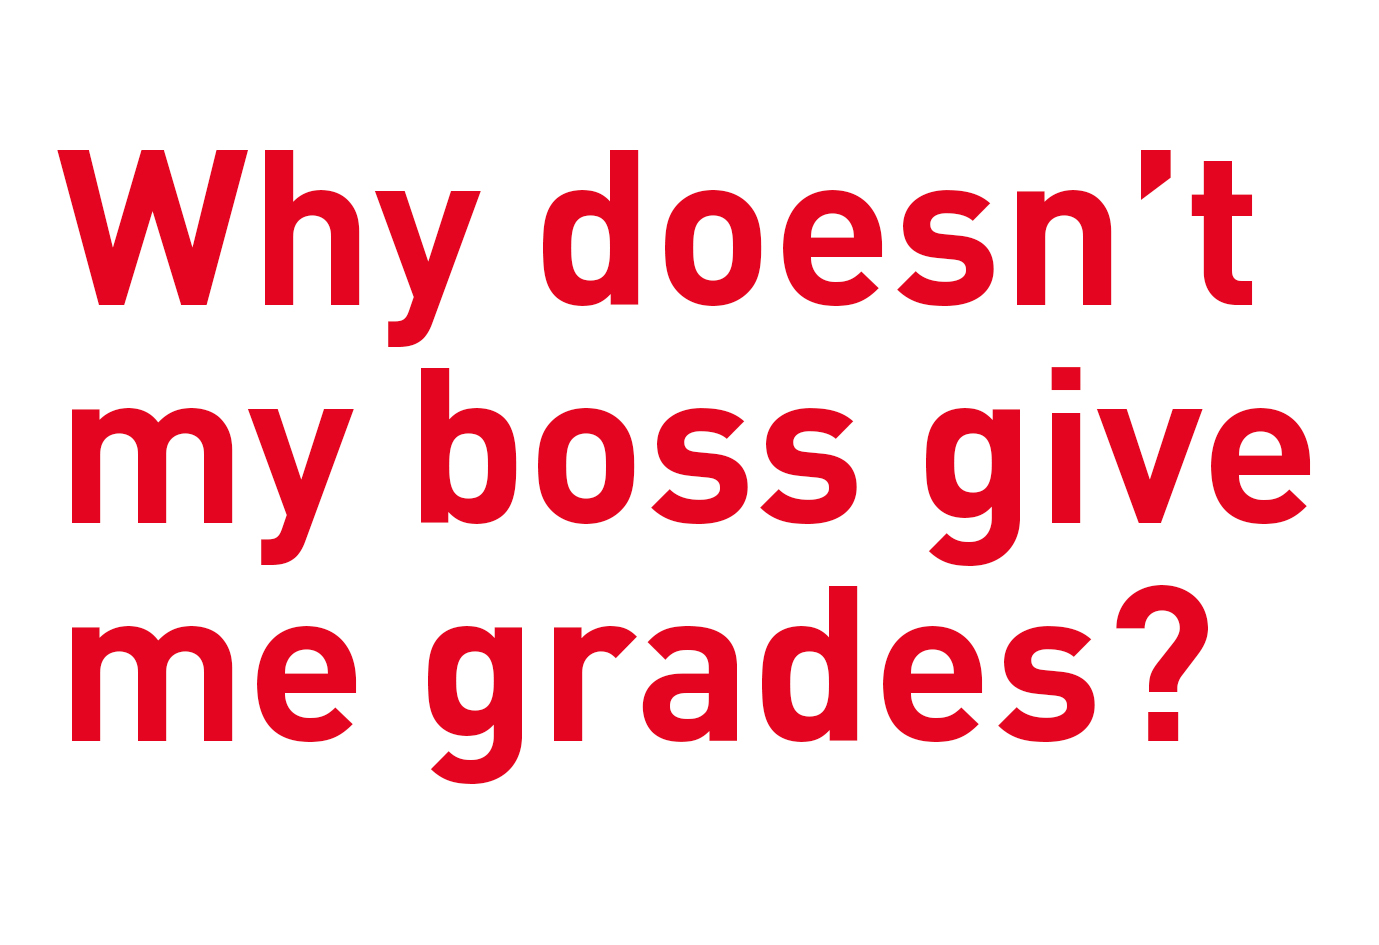 Why doesn’t my boss give me grades? - Lipschule